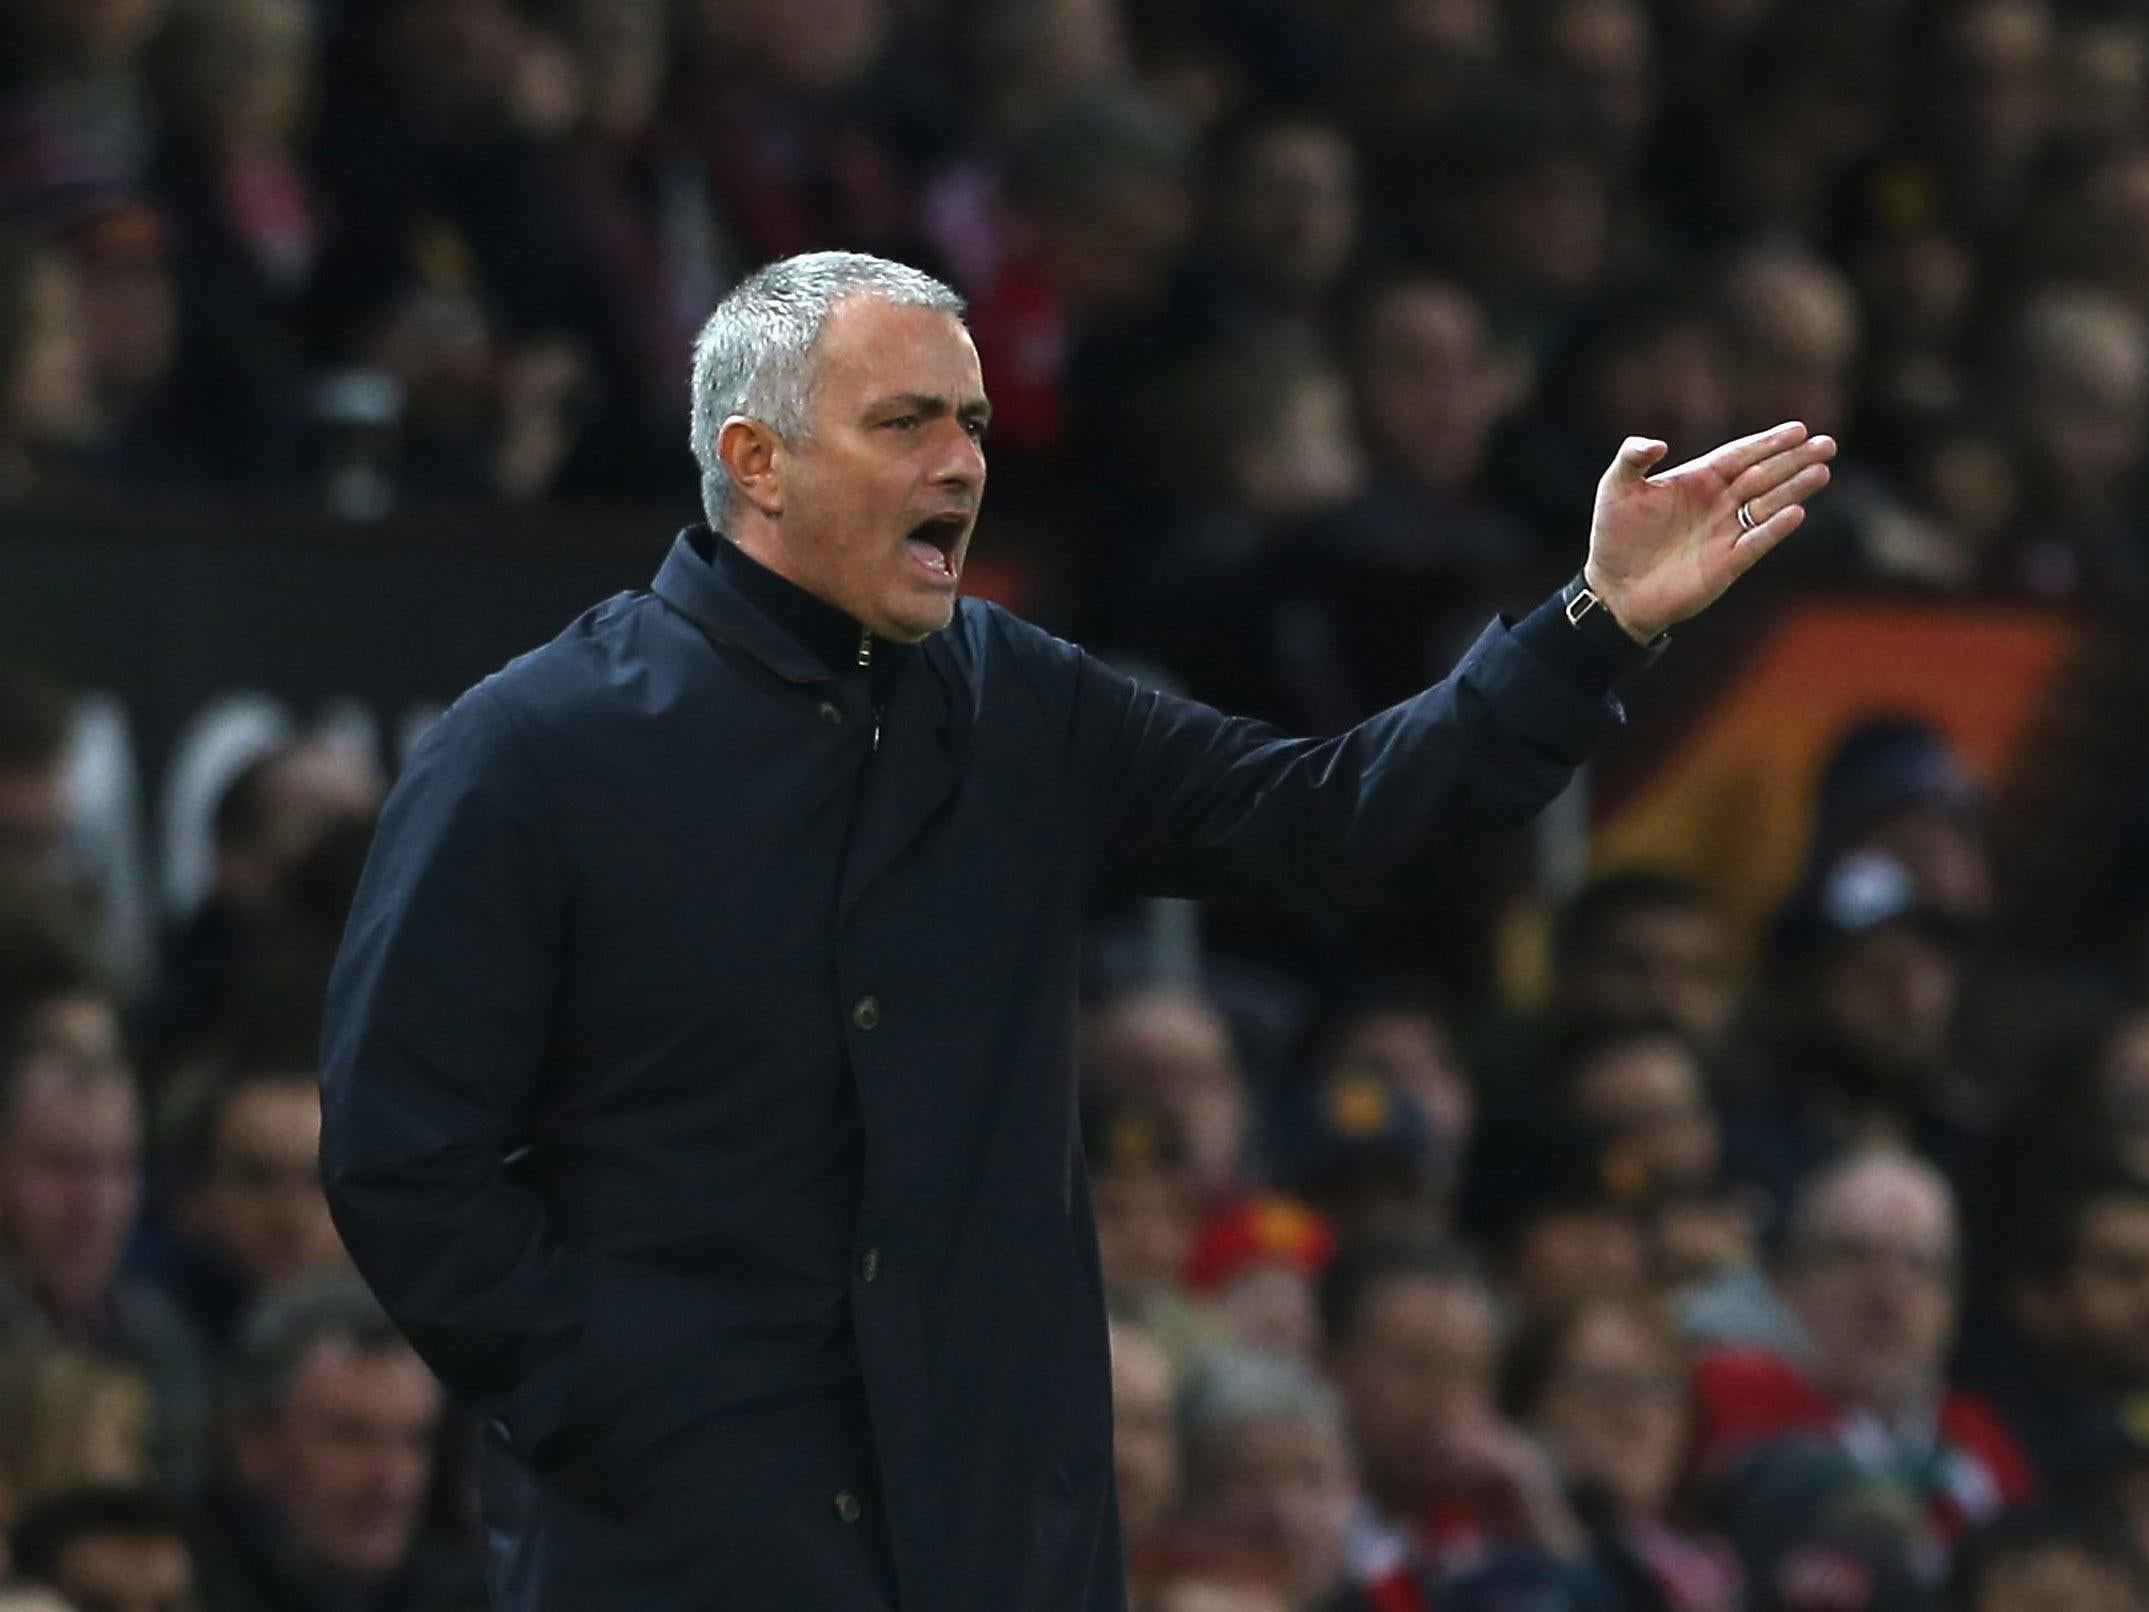 Mourinho has instilled a winning mentality at United